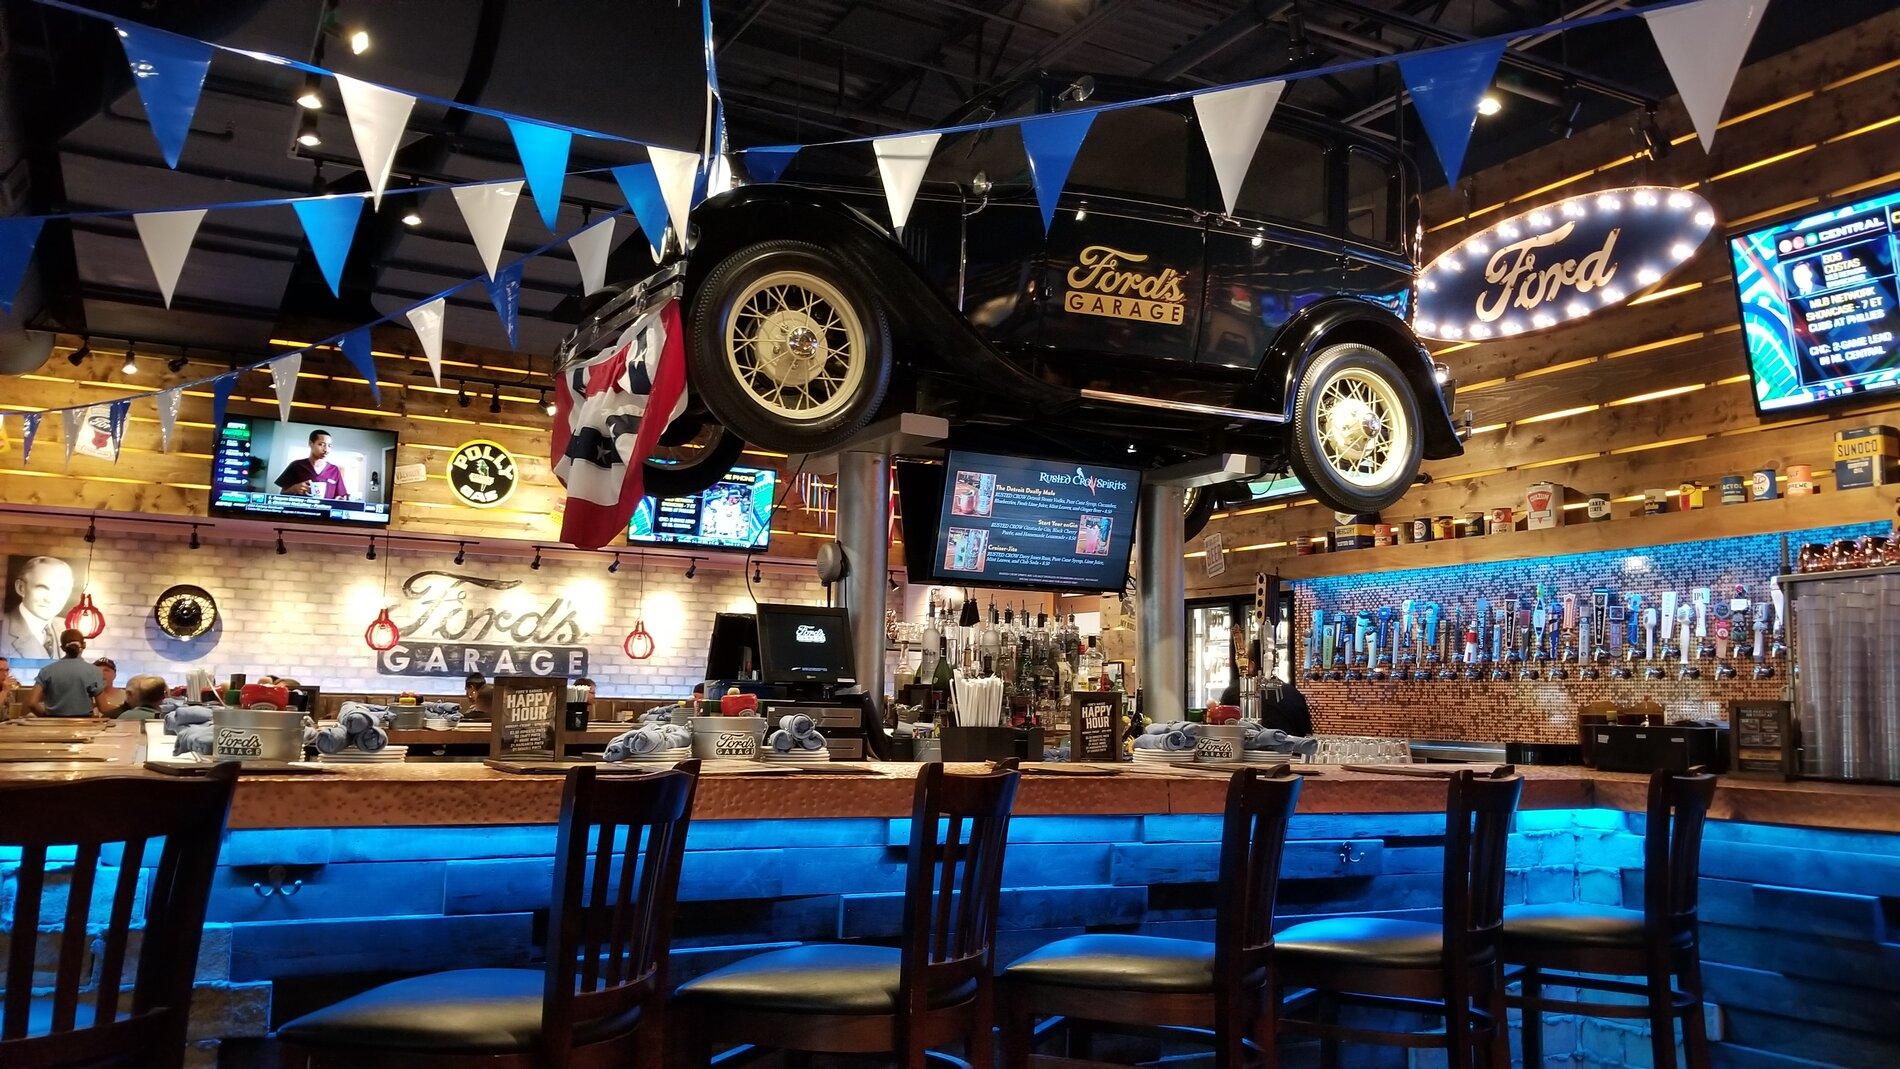 Ford F-150 Lightning Are you going to visit the factory? Ford's Garage Bar